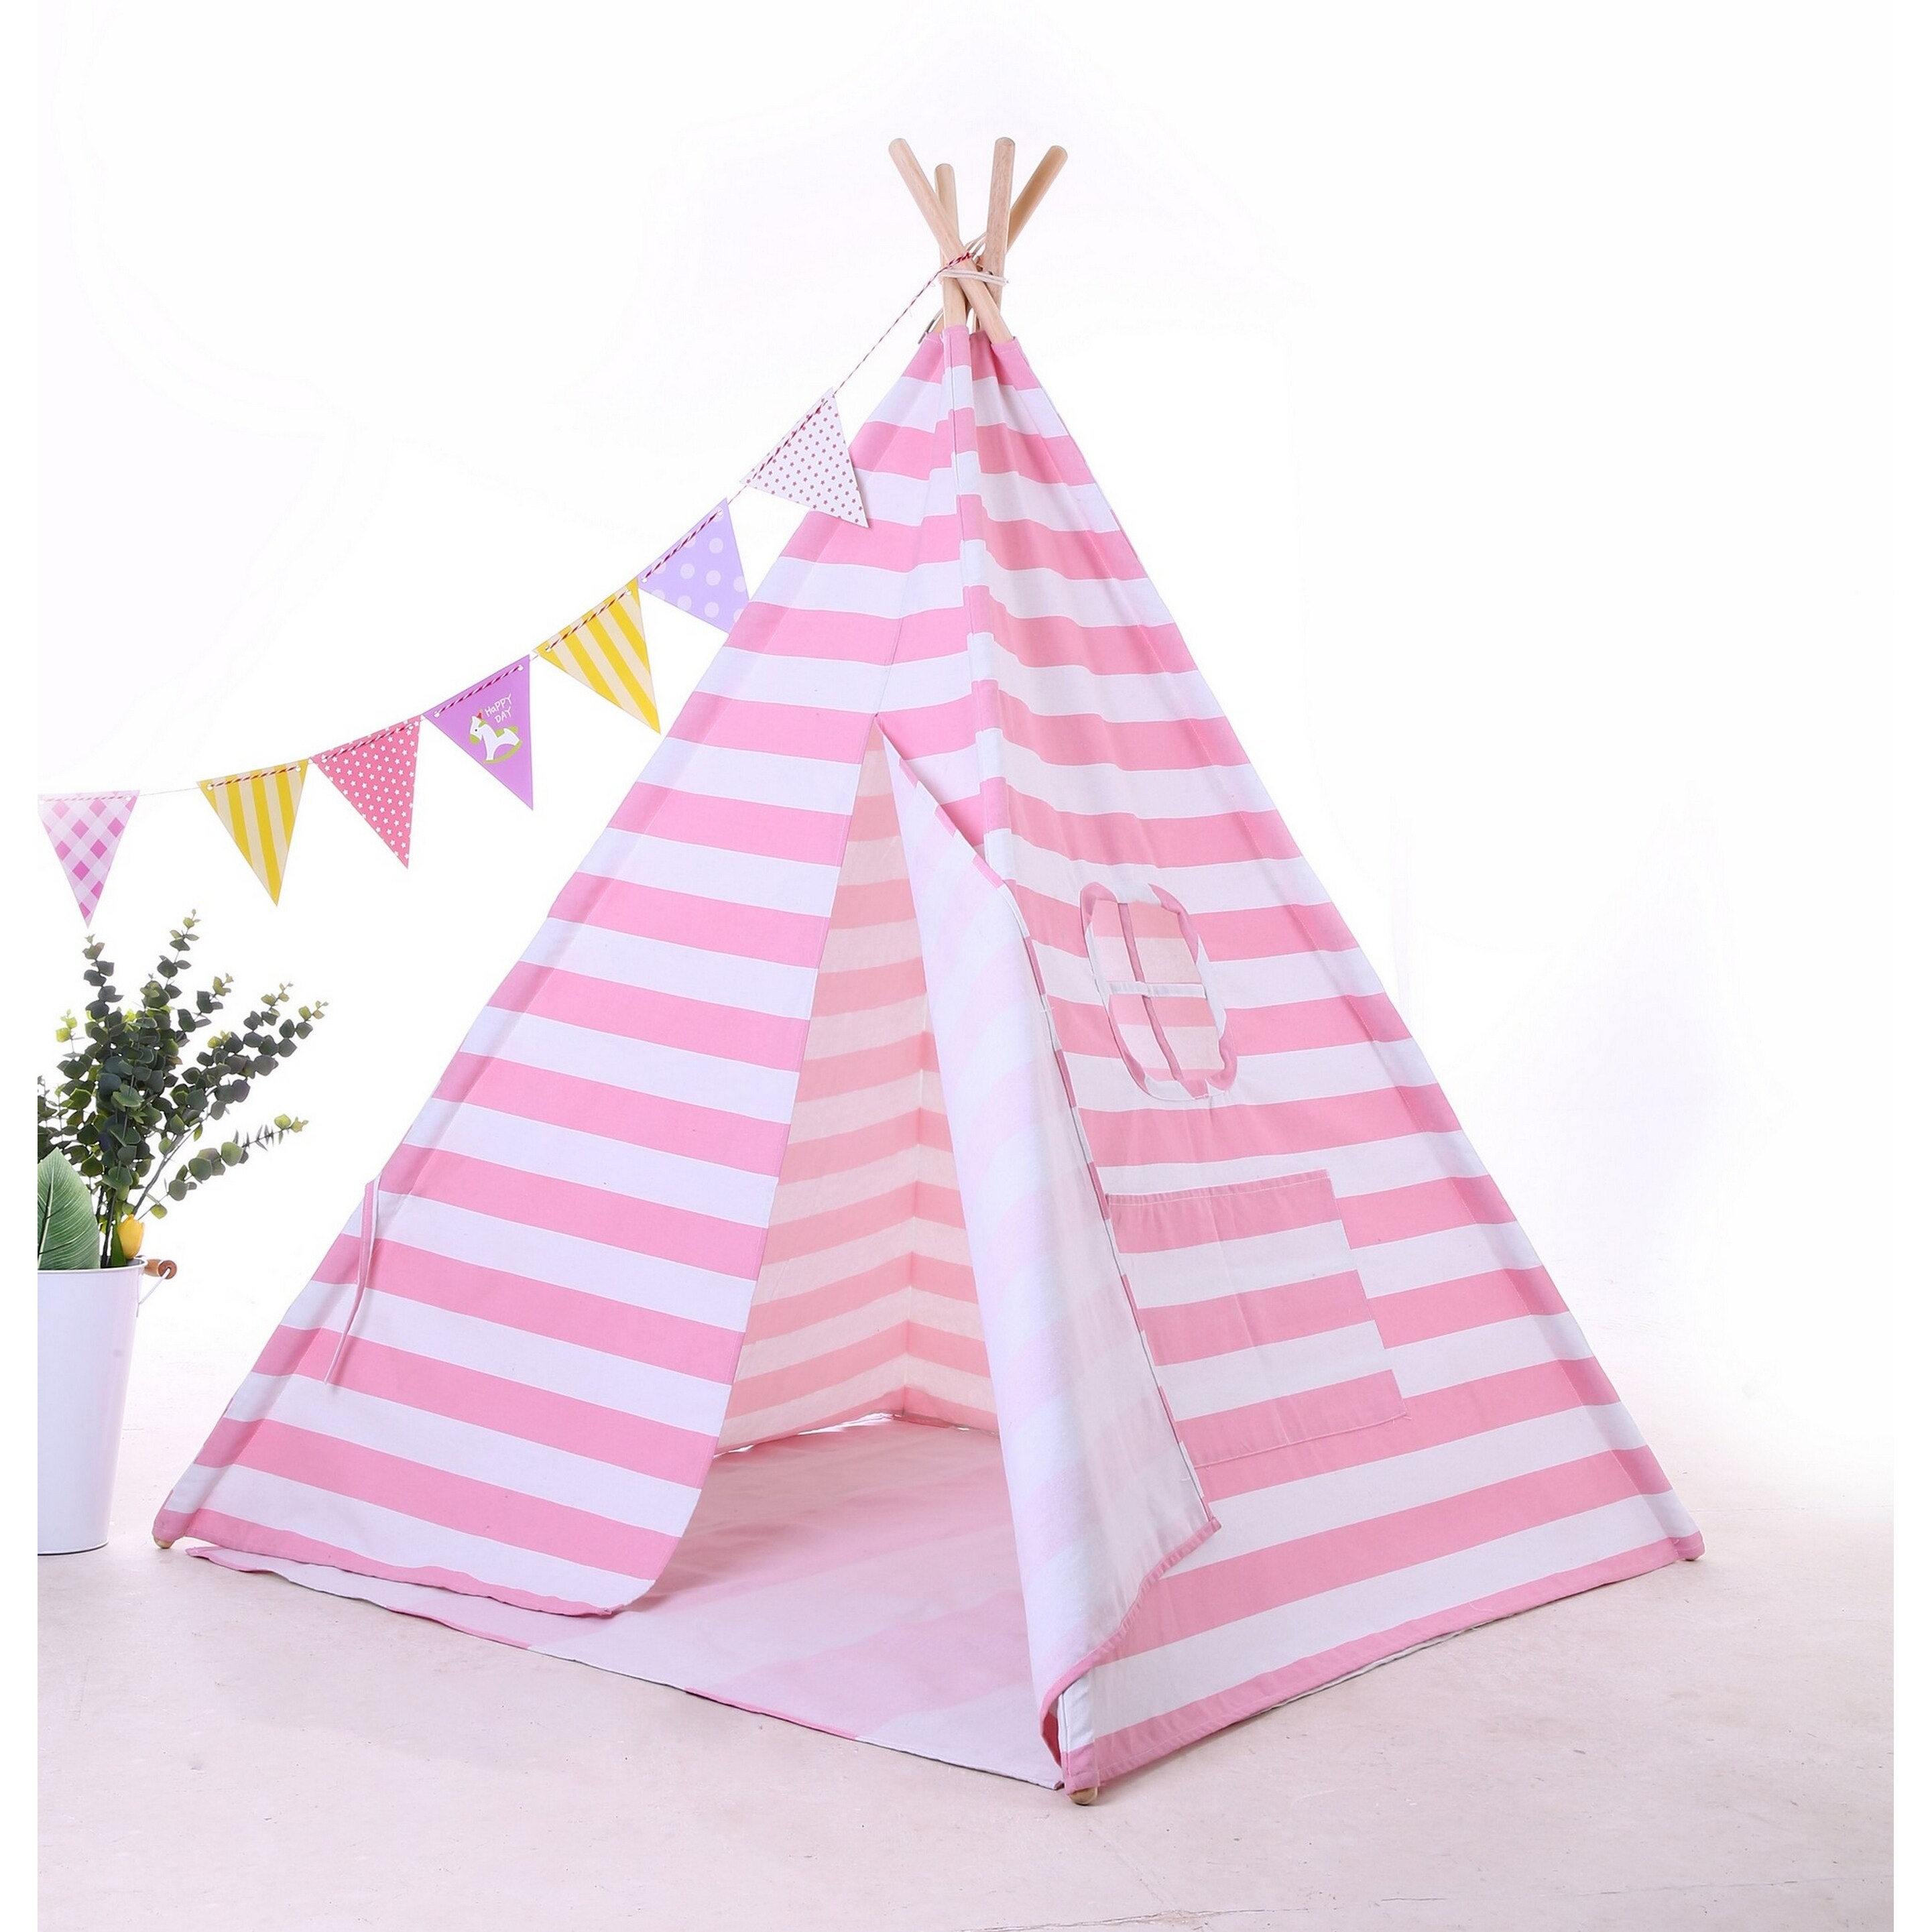 Teepee Tent for Kids with Carry Case,Cavas Toys for Girls/Boys Girls